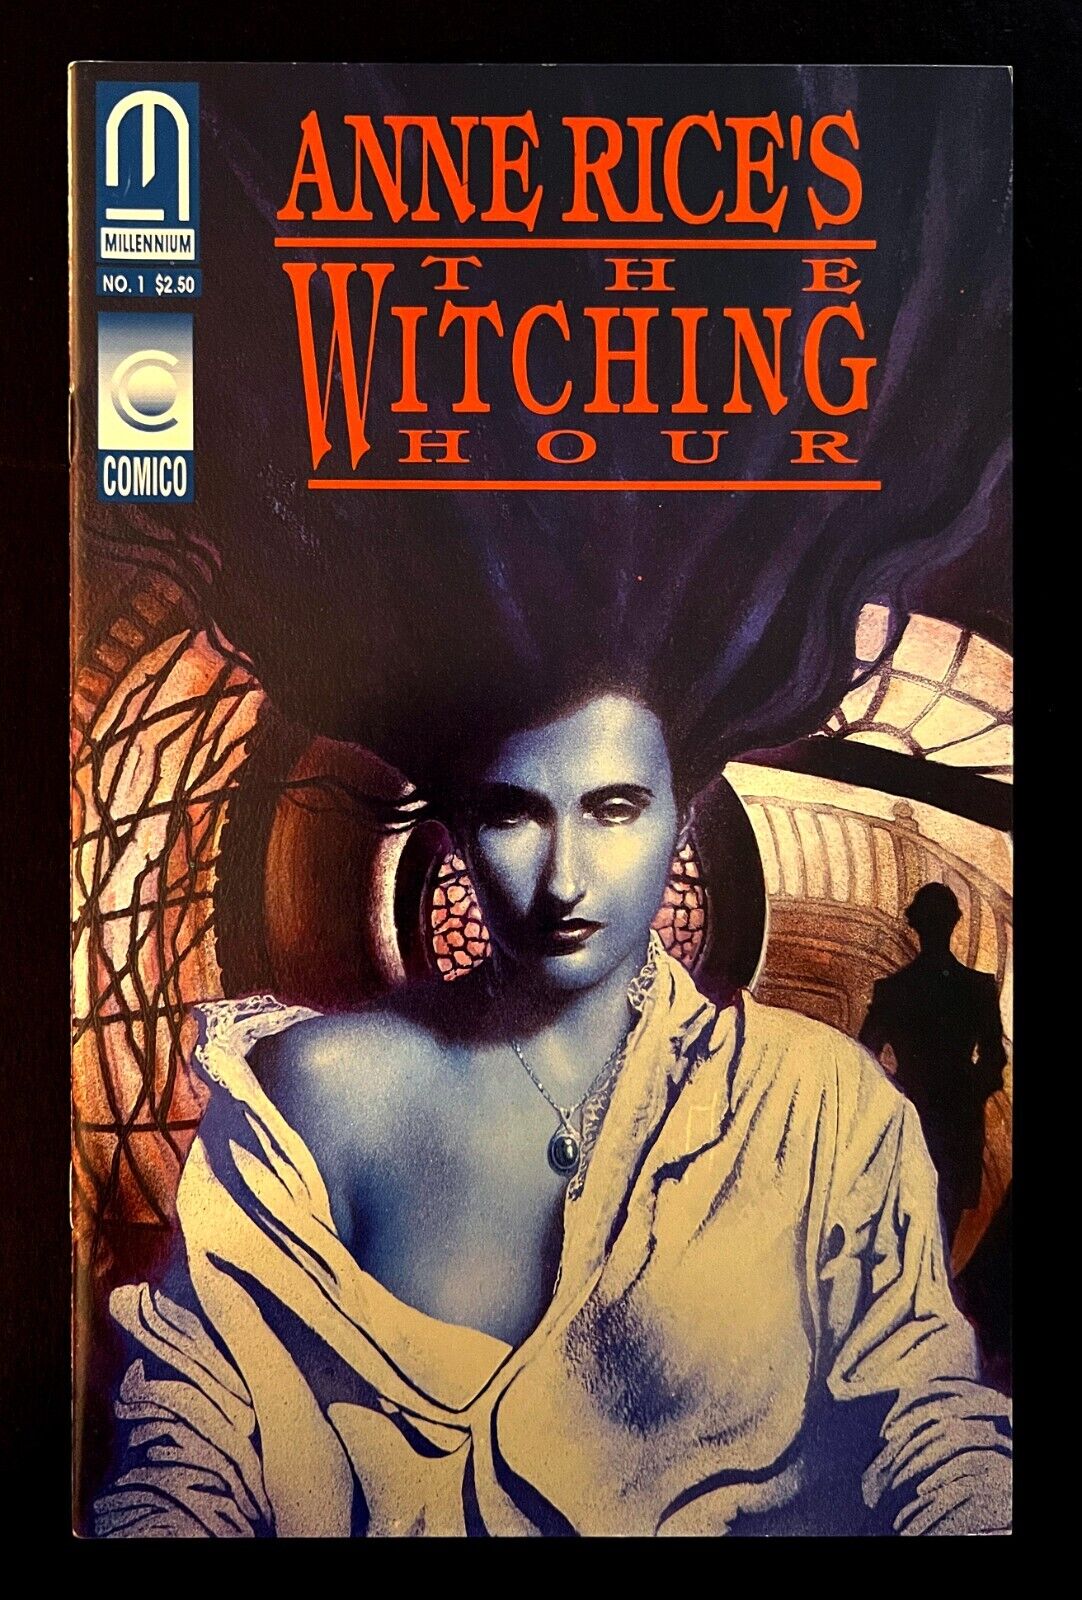 ANNE RICE'S THE WITCHING HOUR #1 MAYFAIR WITCHES Hi Grade Millenium/Comico 1992